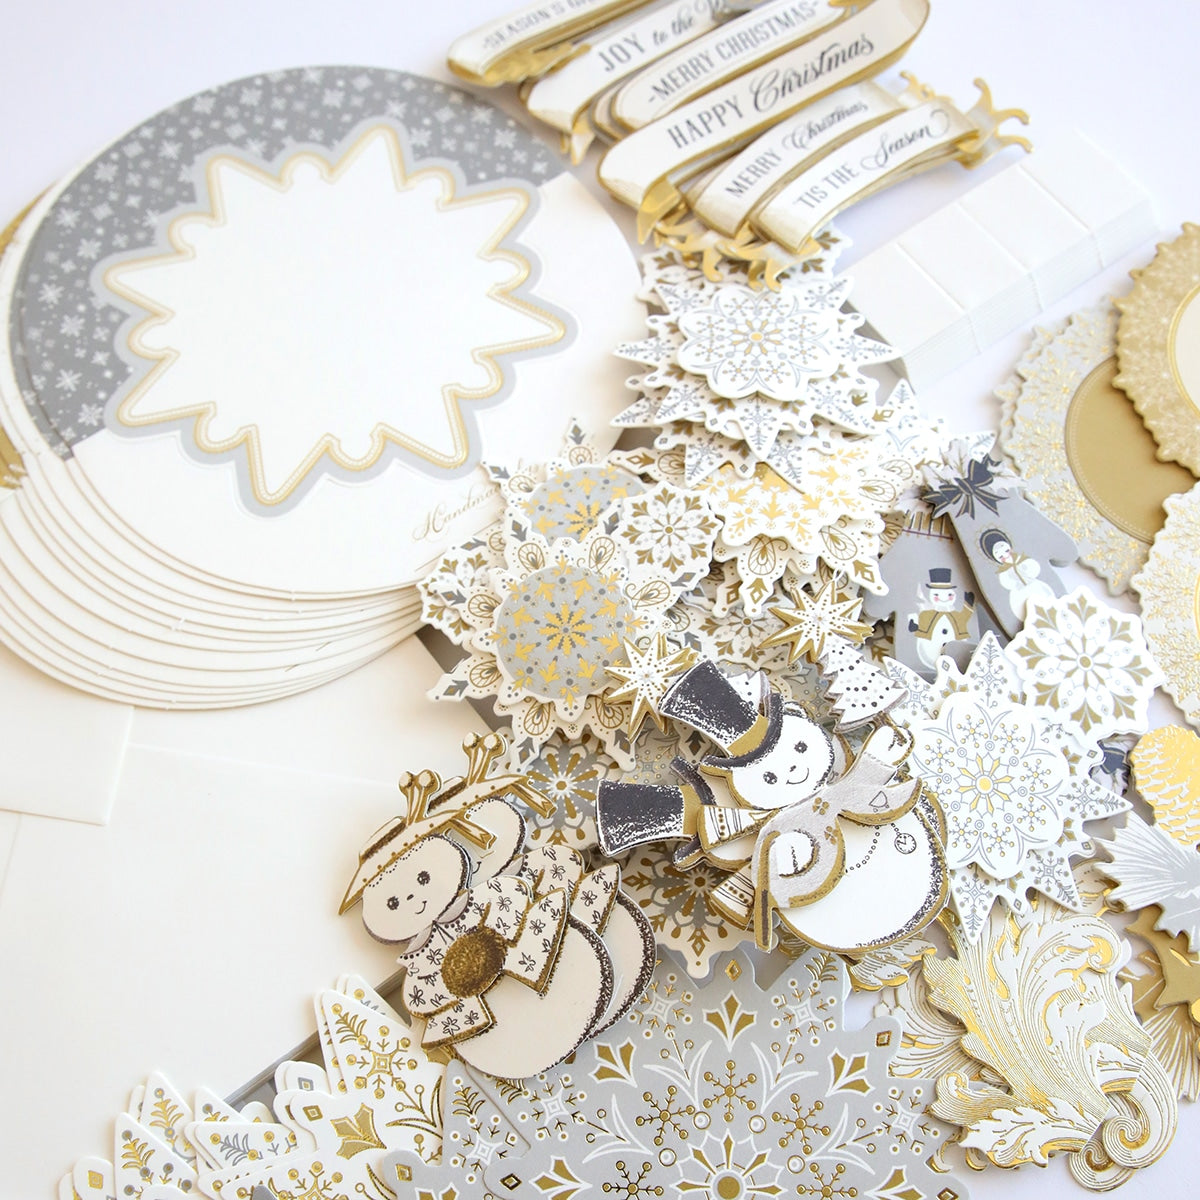 A white and gold scrapbooking kit with Simply Rocking Snowflake Card Kit and snowflakes.